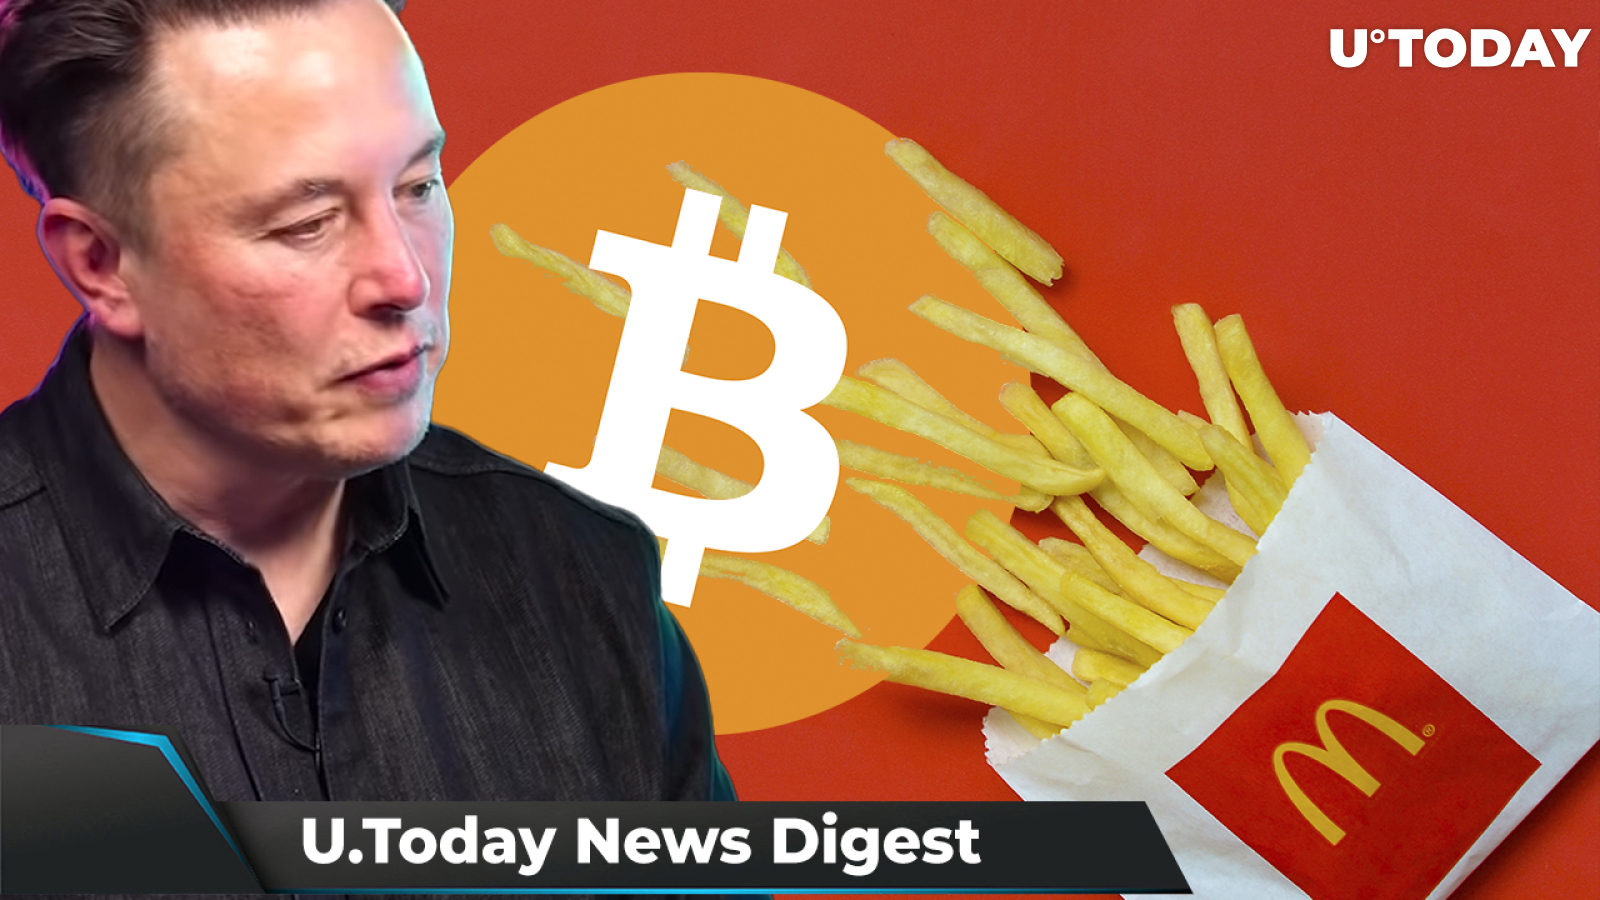 Elon Musk Urges McDonald’s to Accept DOGE, SHIB Accepted by SuperJeweler, BTC Could Be Hacked with Quantum Computers: Crypto News Digest by U.Today